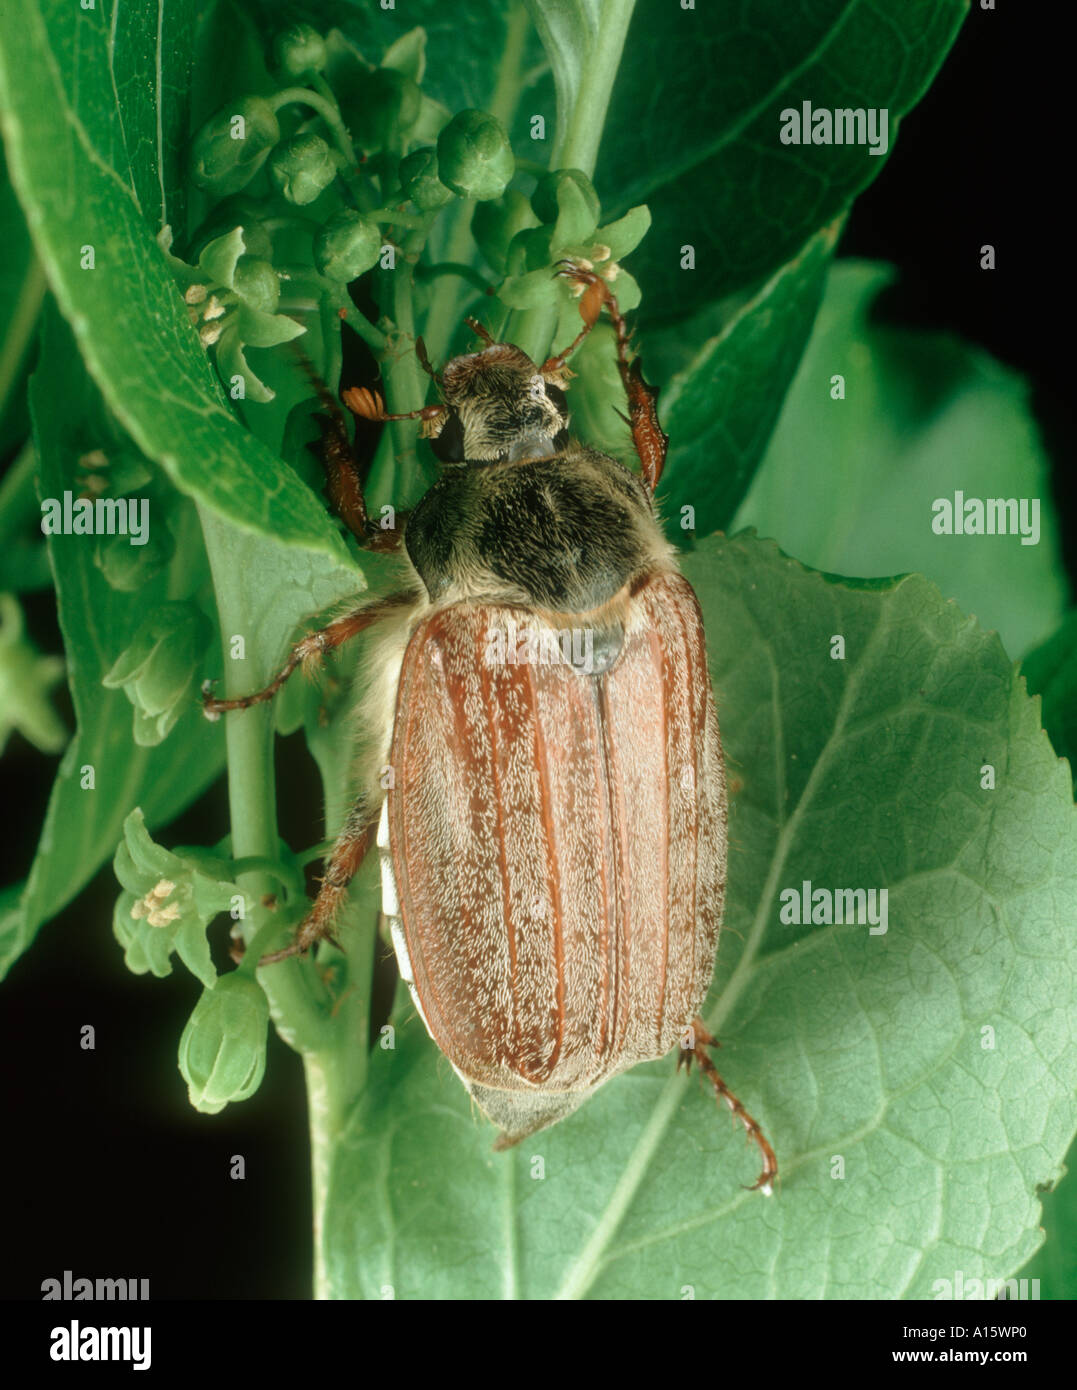 Adult cockchafer or may bug Melolontha melolontha adult Stock Photo